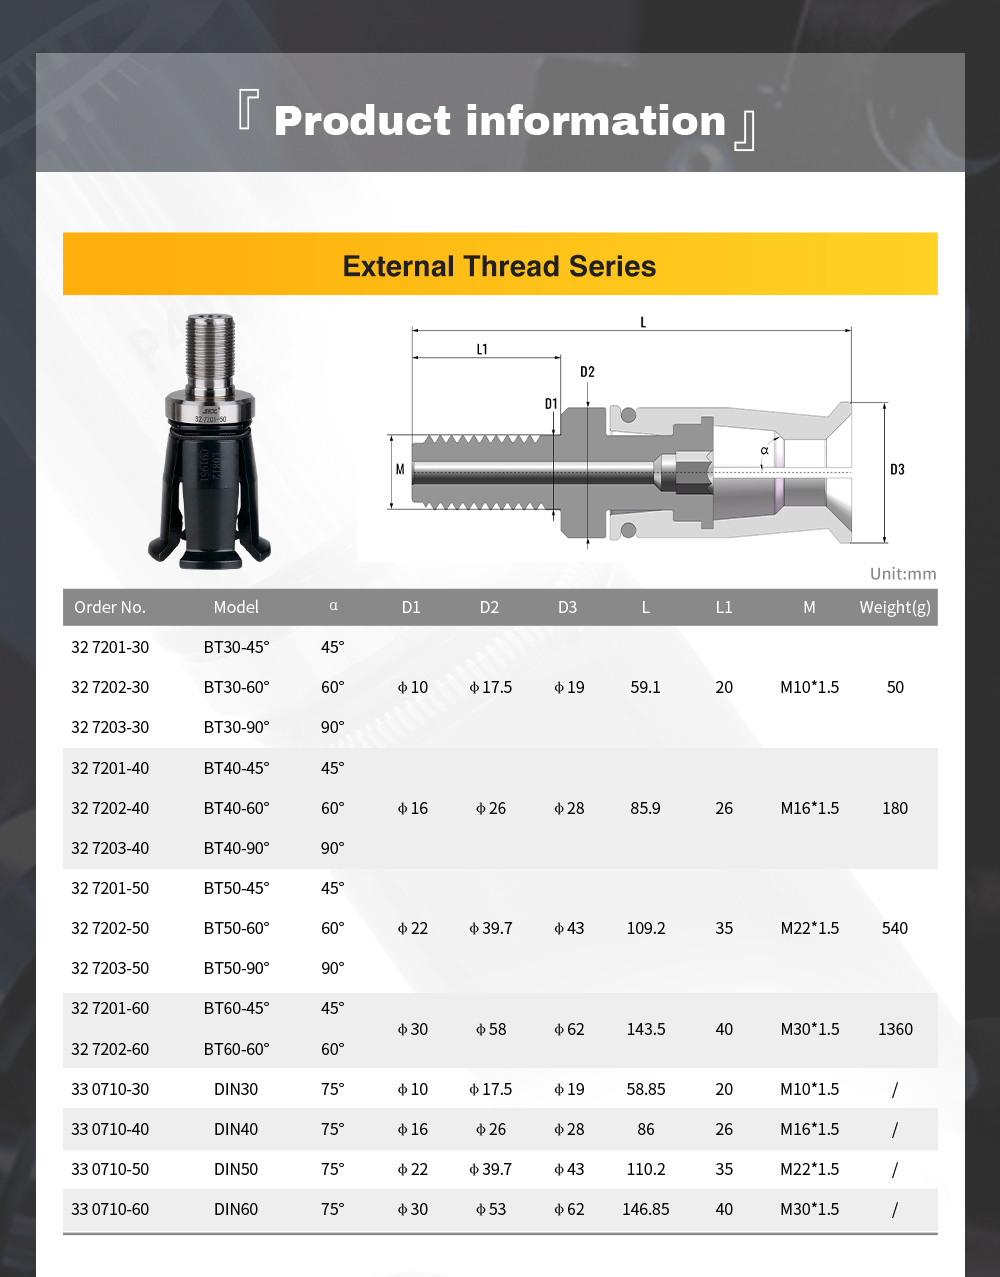 SFX BT30/BT40/BT50/BT60 DIN40/DIN50/DIN60 CNC Spindle Pull Claw Four-petal Claw Featured Nickel Steel For Clamping Tool Holder SFX BT30/BT40/BT50/BT60 CNC Spindle Pull Claw Four-petal Claw